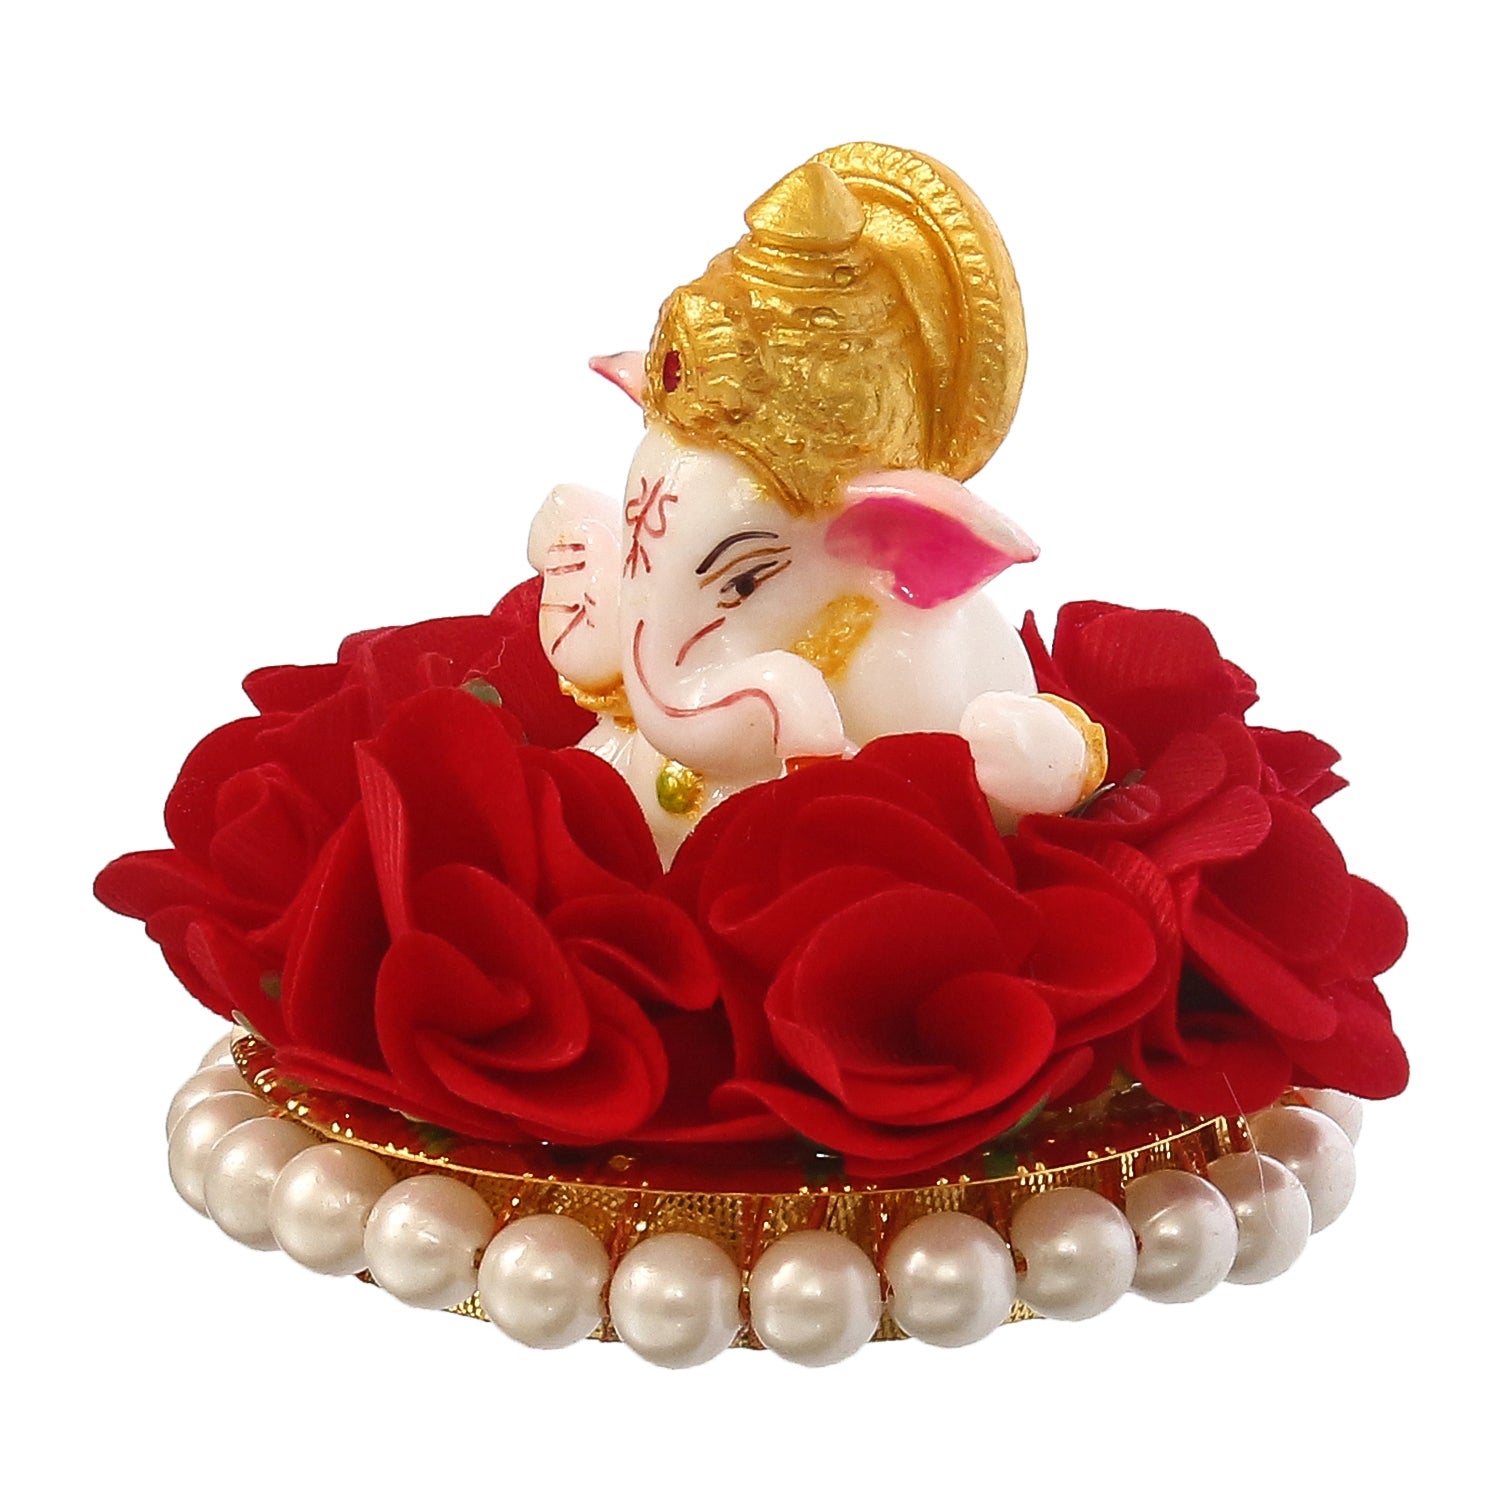 Lord Ganesha Idol on Decorative Handcrafted Plate with Red Flowers 5